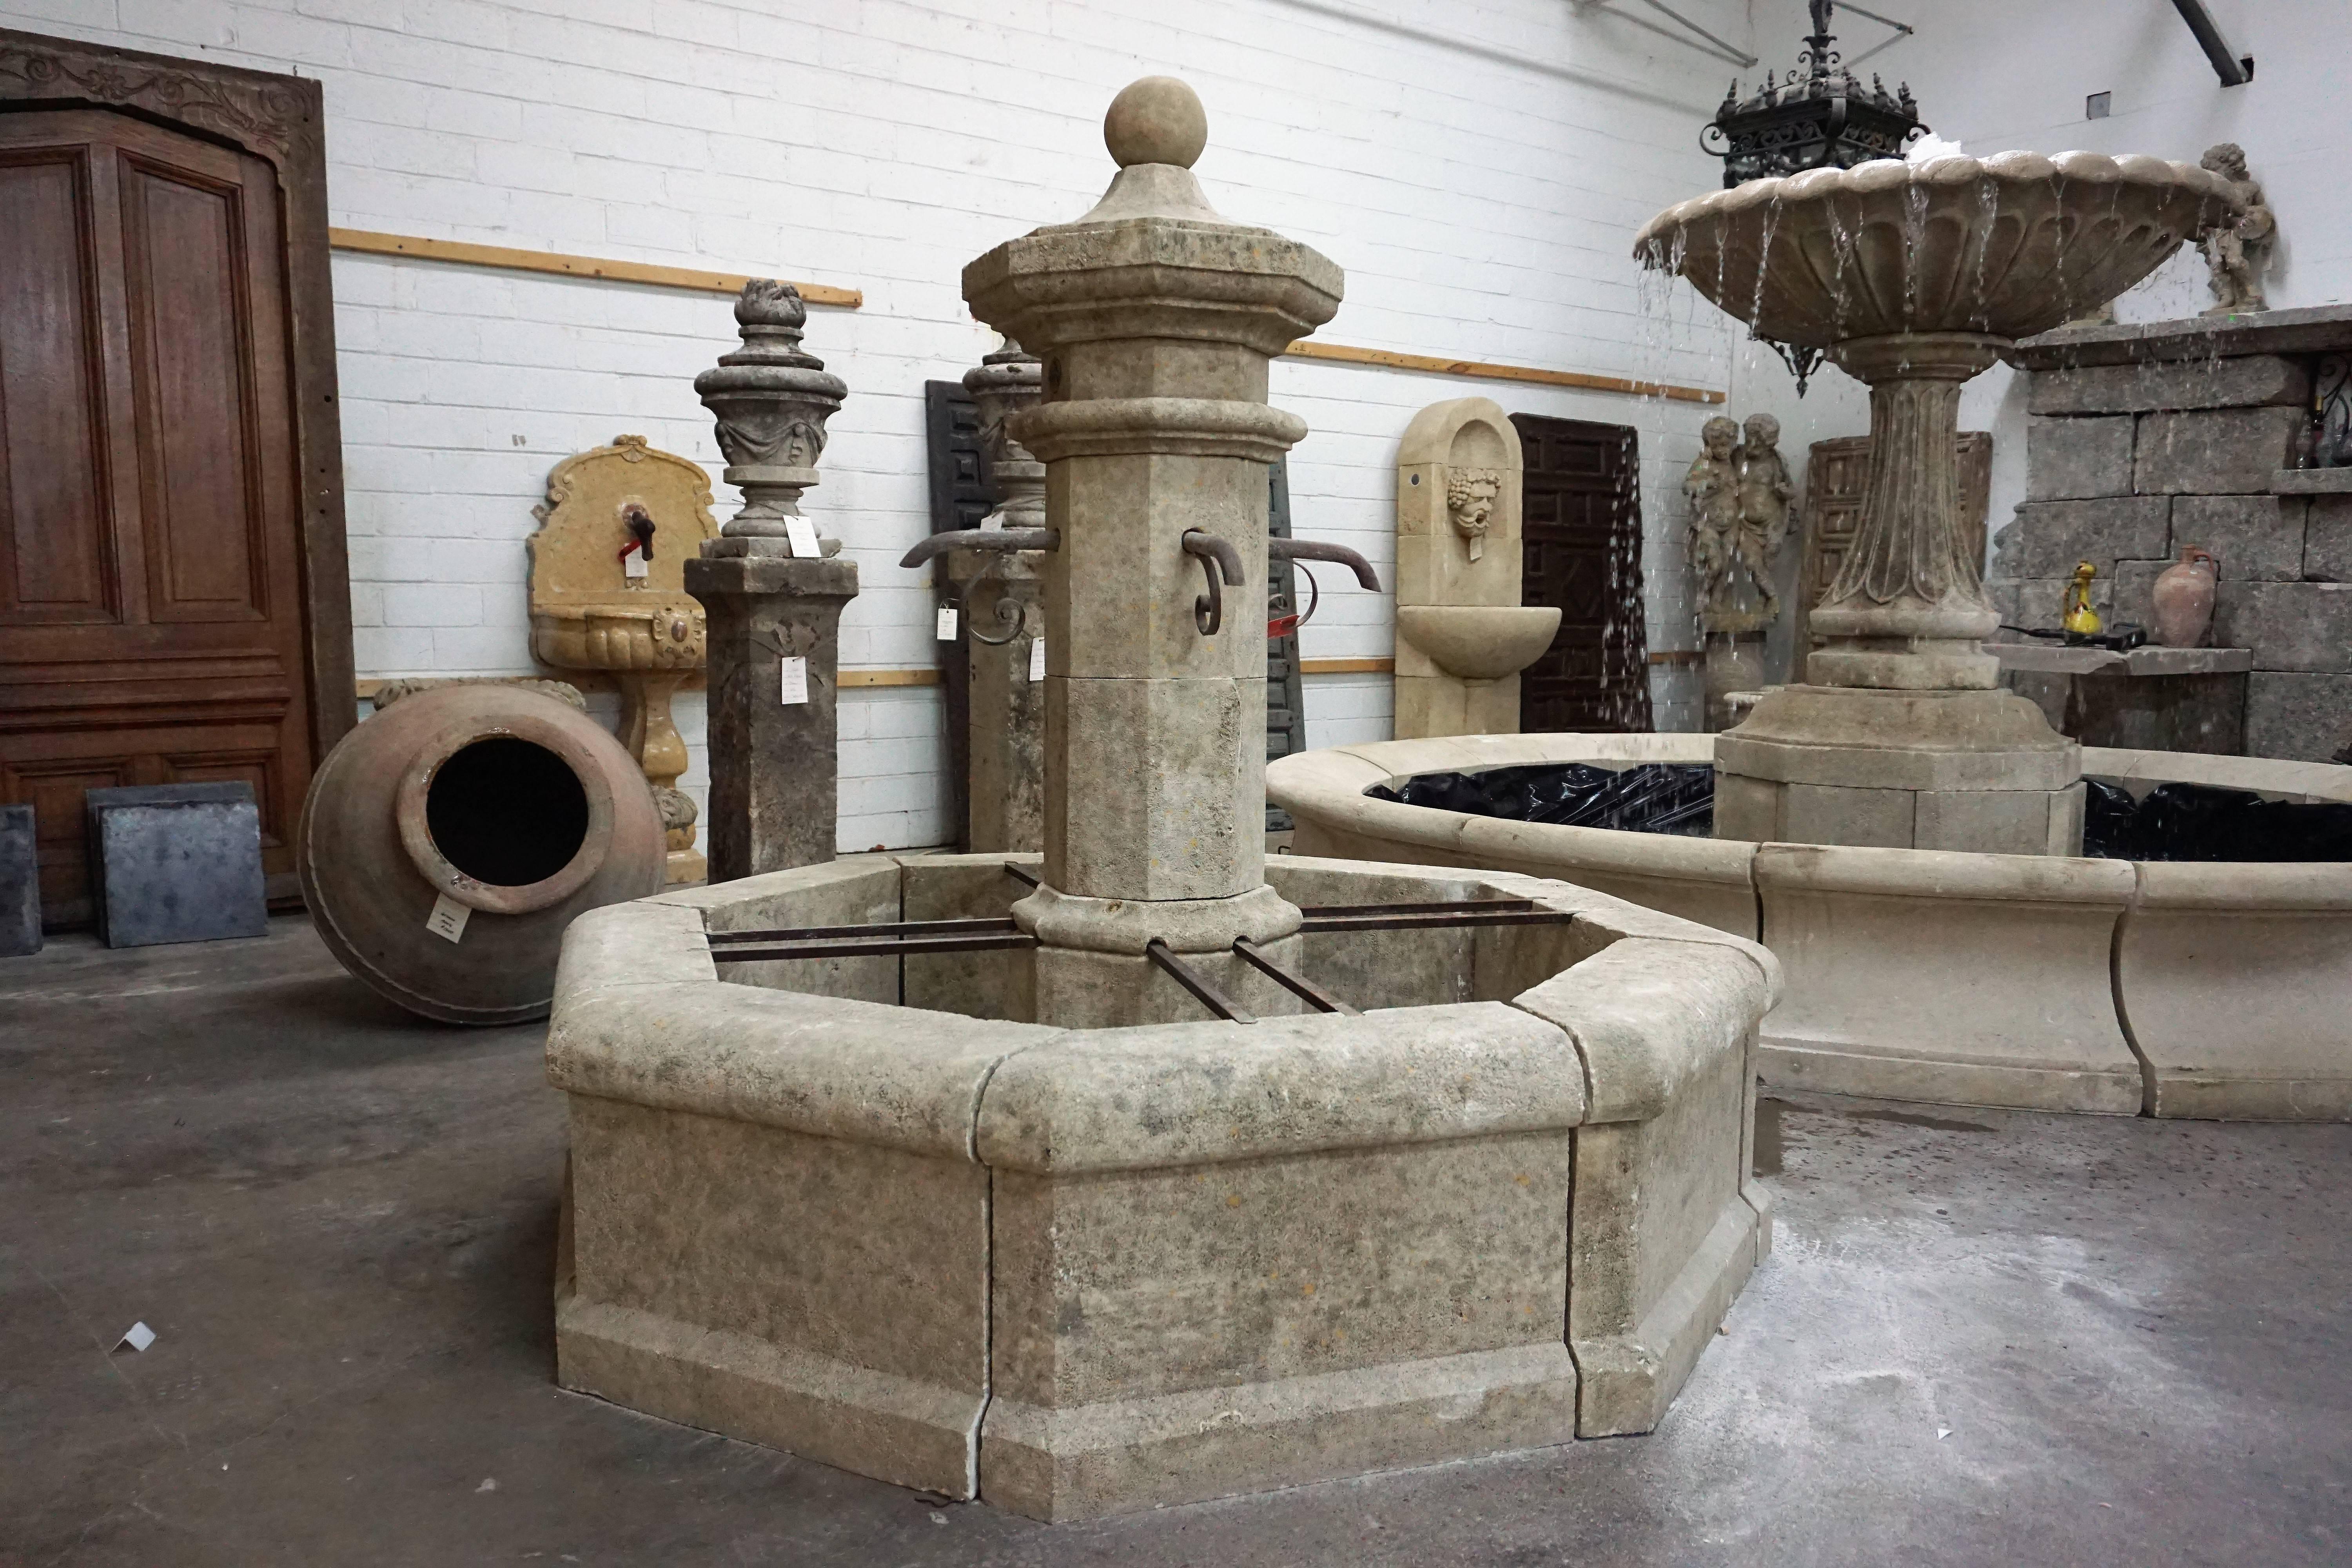 Here we offer a hand carved limestone central fountain with four iron downspouts. This fountain is a classical French design from an antique village fountain reclaimed outside Montpellier, France. The acoustics from this fountain will fill the air